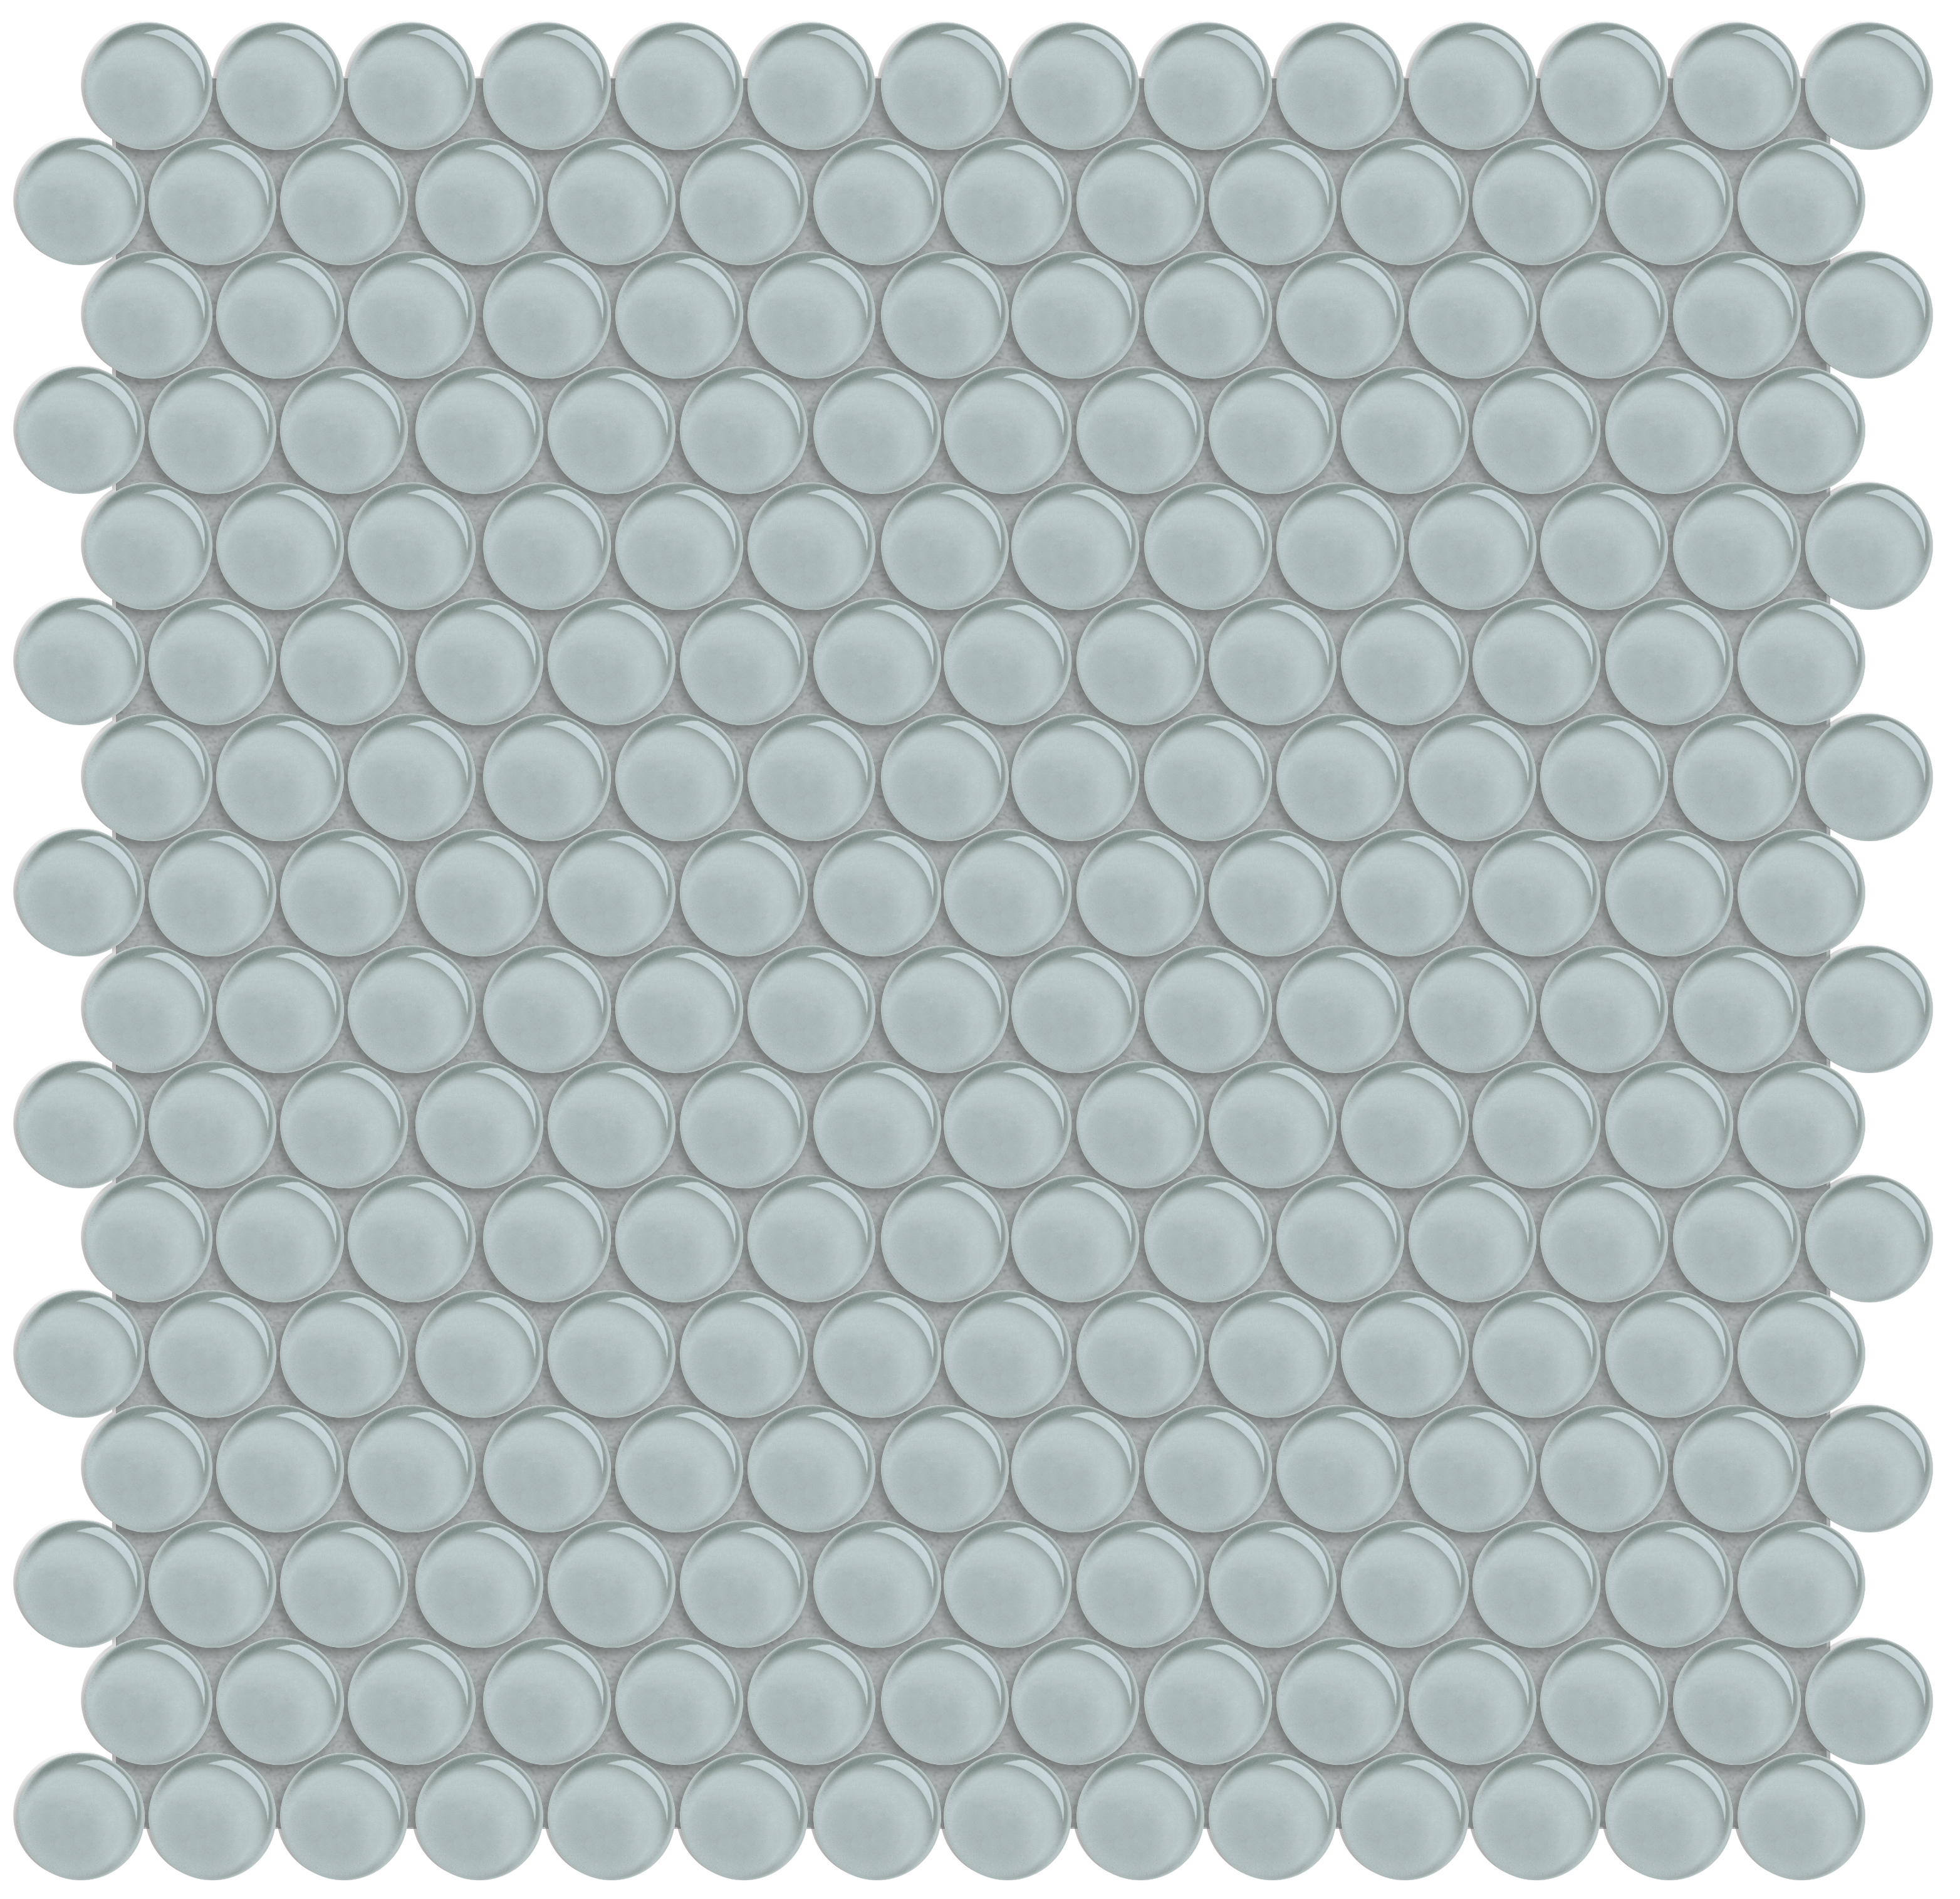 cloud penny round pattern fused glass mosaic from element anatolia collection distributed by surface group international glossy finish rounded edge mesh shape